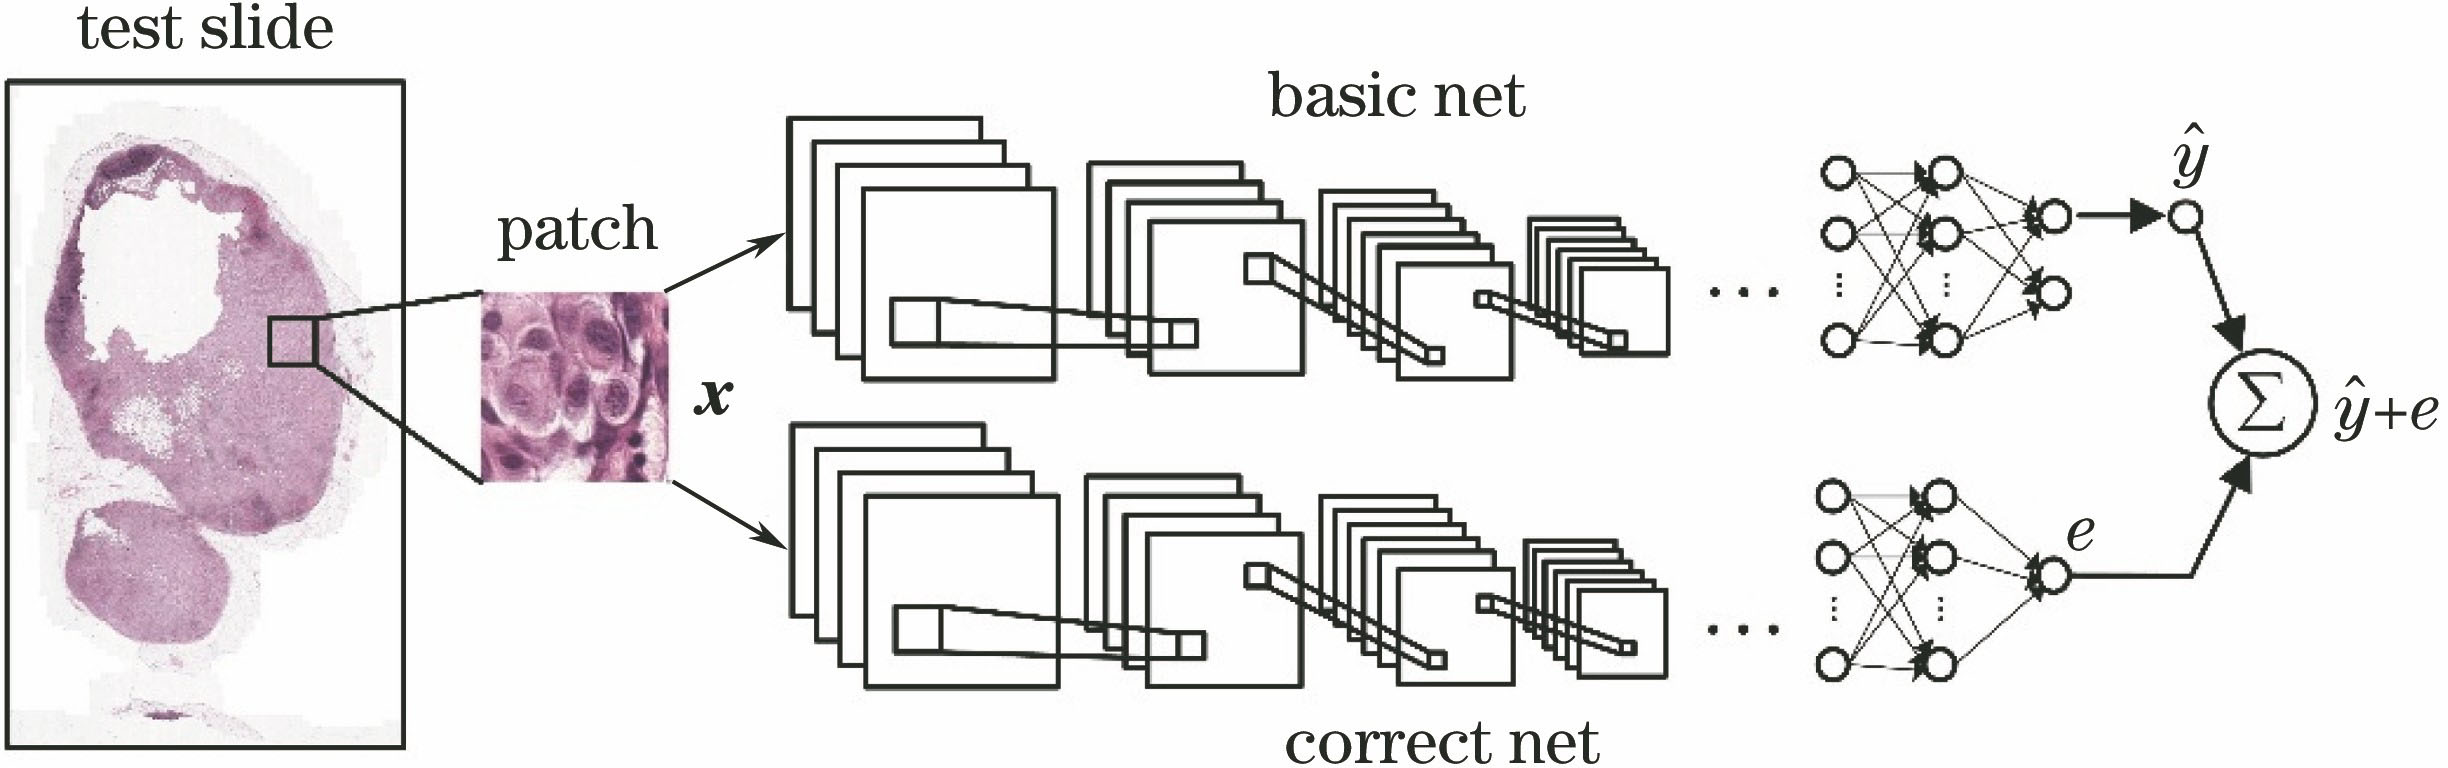 Test process of boosting convolutional neural network model